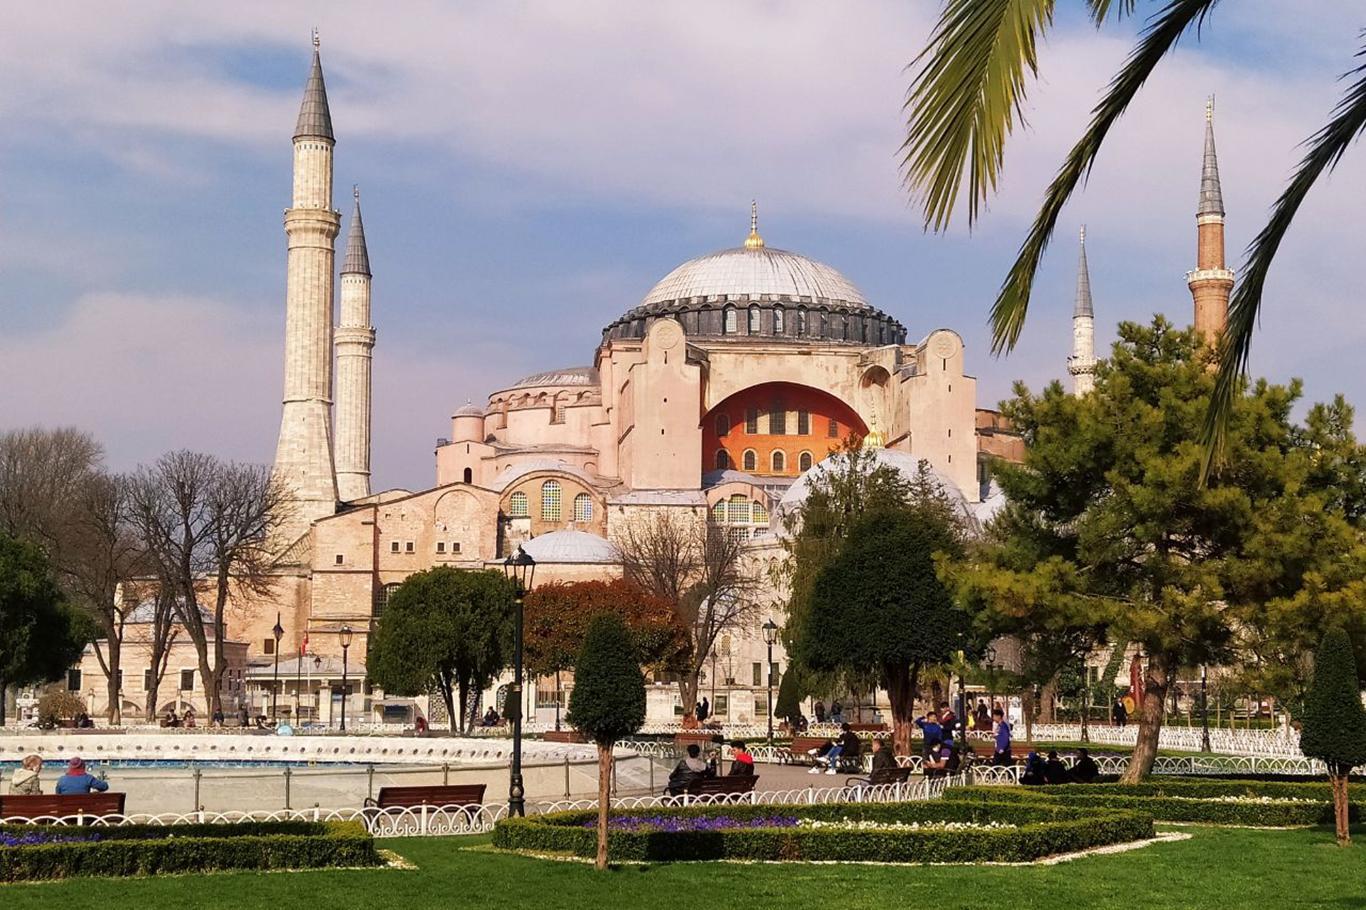 Hagia Sophia to be converted to Mosque, Turkey’s Council of State rules